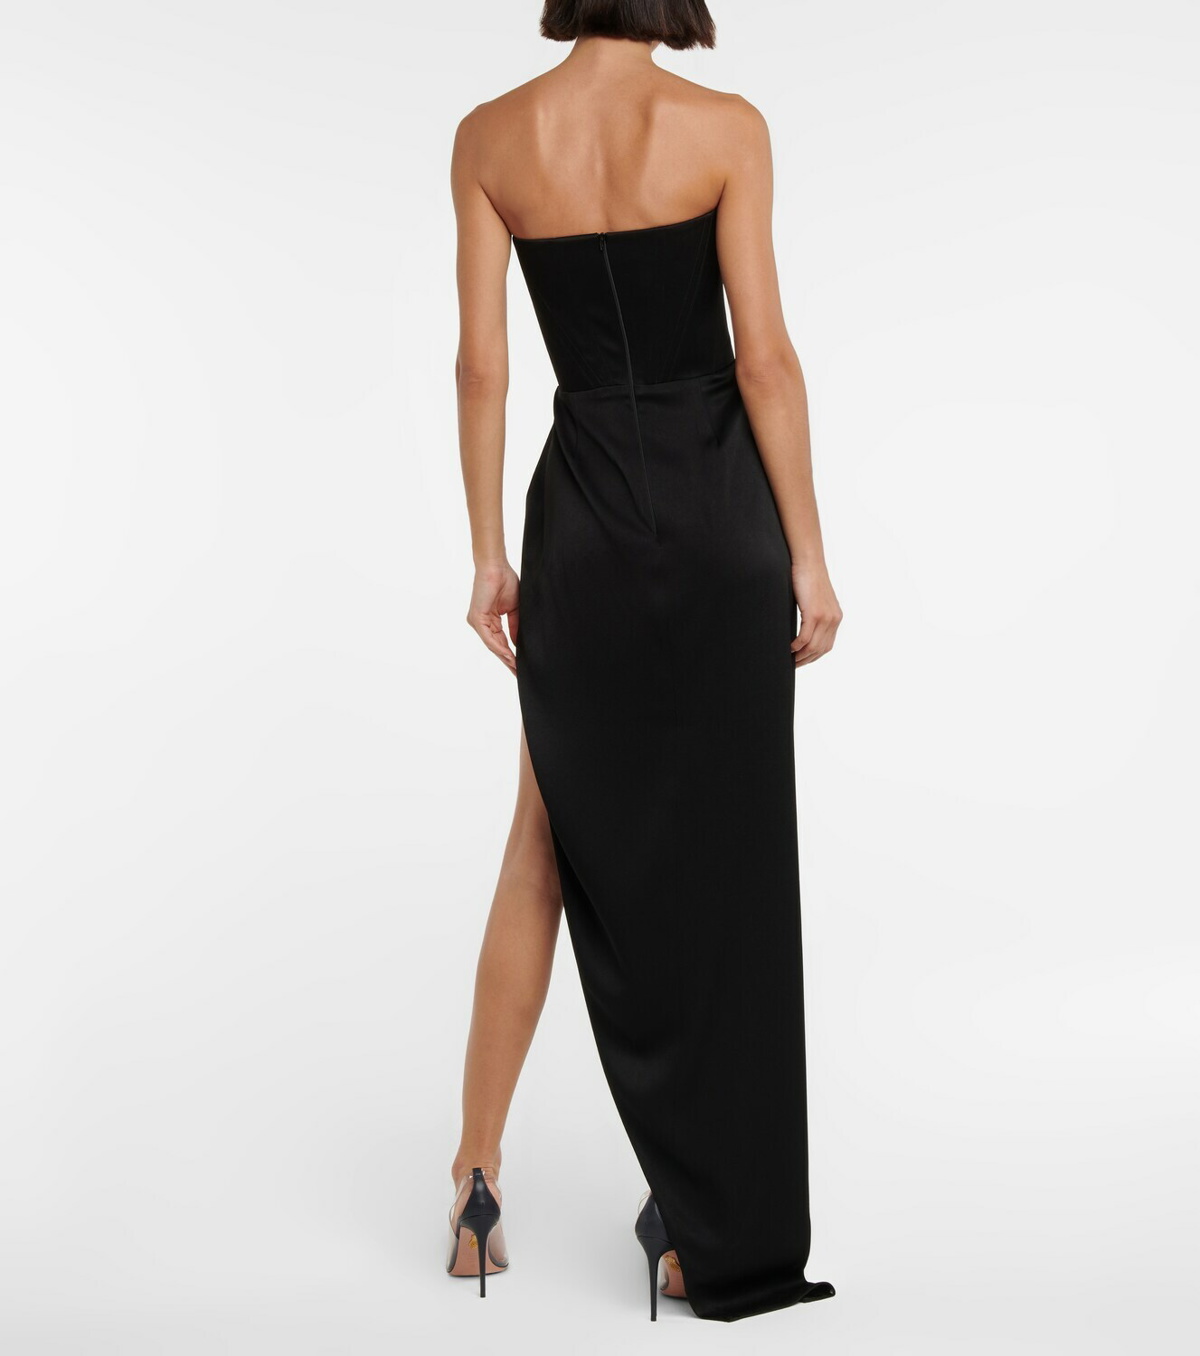 Alex Perry Ledger strapless satin gown Alex Perry